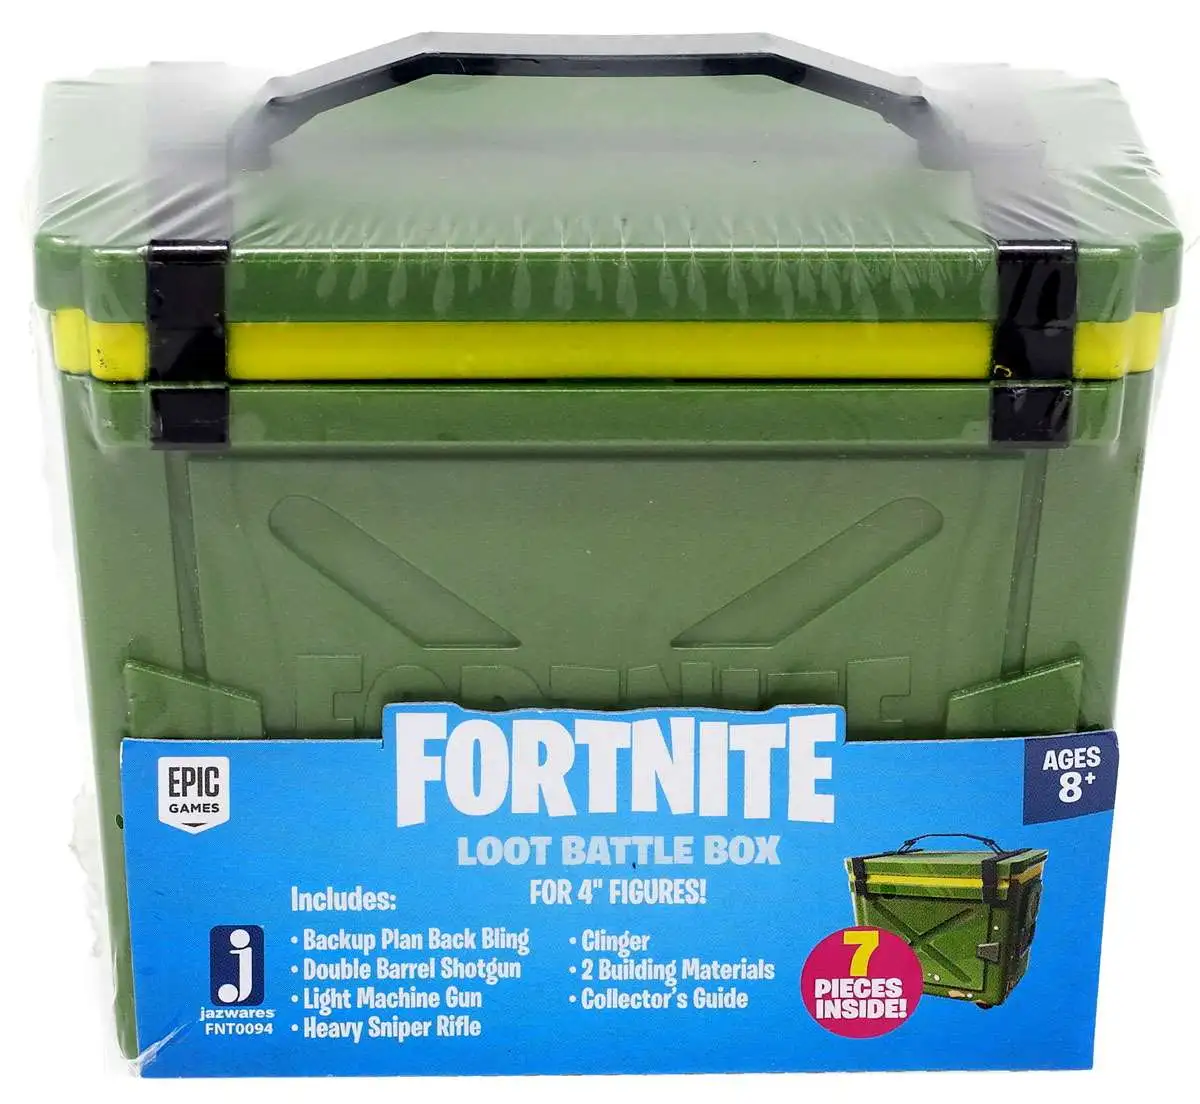 FORTNITE LOOT CHEST 7 Pieces Jazwares 4" Fortnite Figures lot of 4 